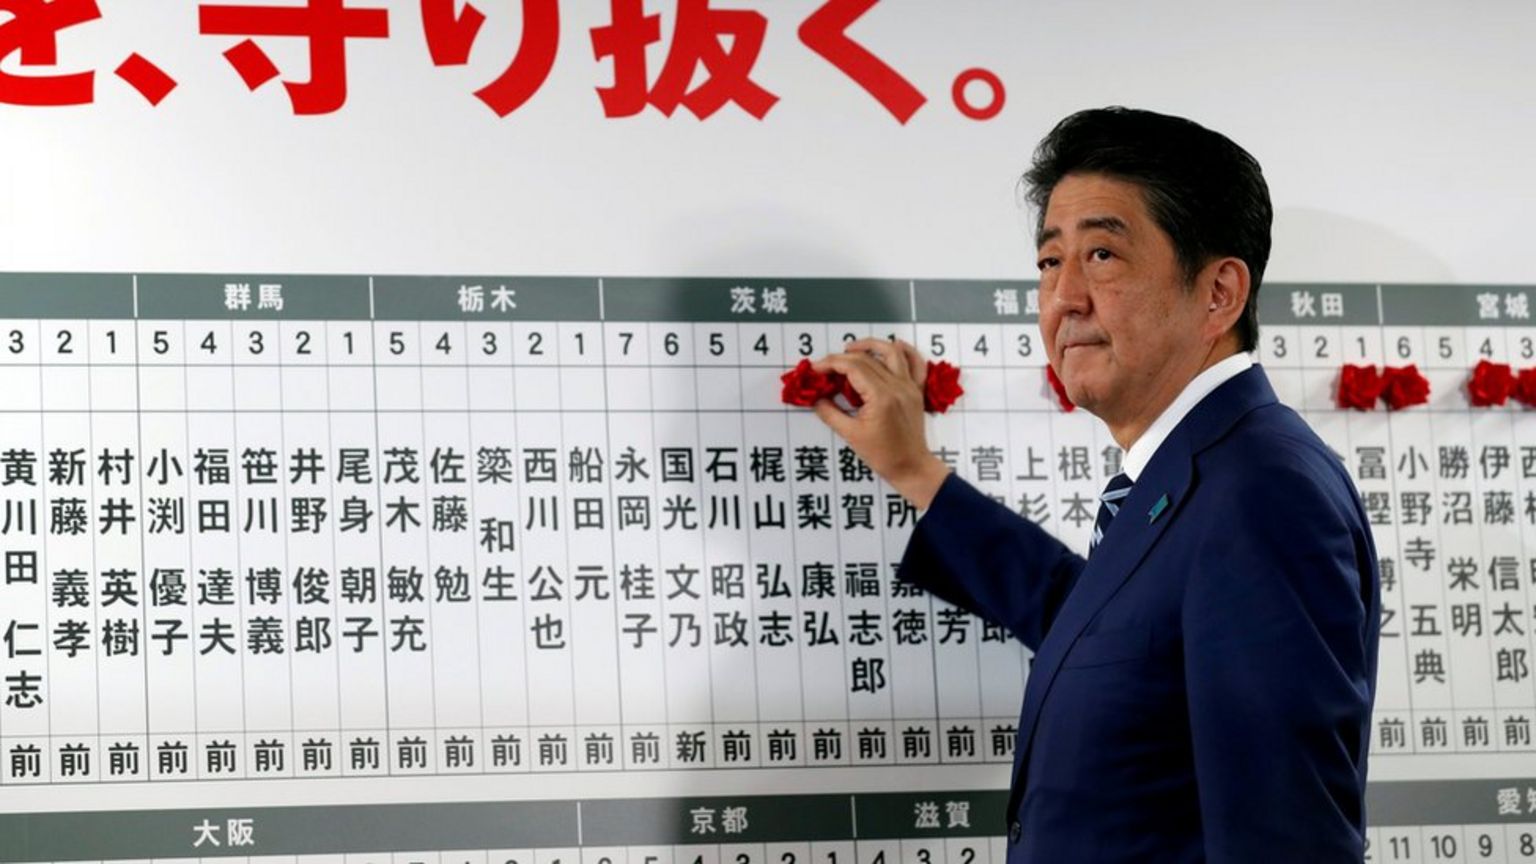 Prime Minister Shinzo Abe looks on as he puts a rosette on the name of a candidate who is expected to win the lower house election